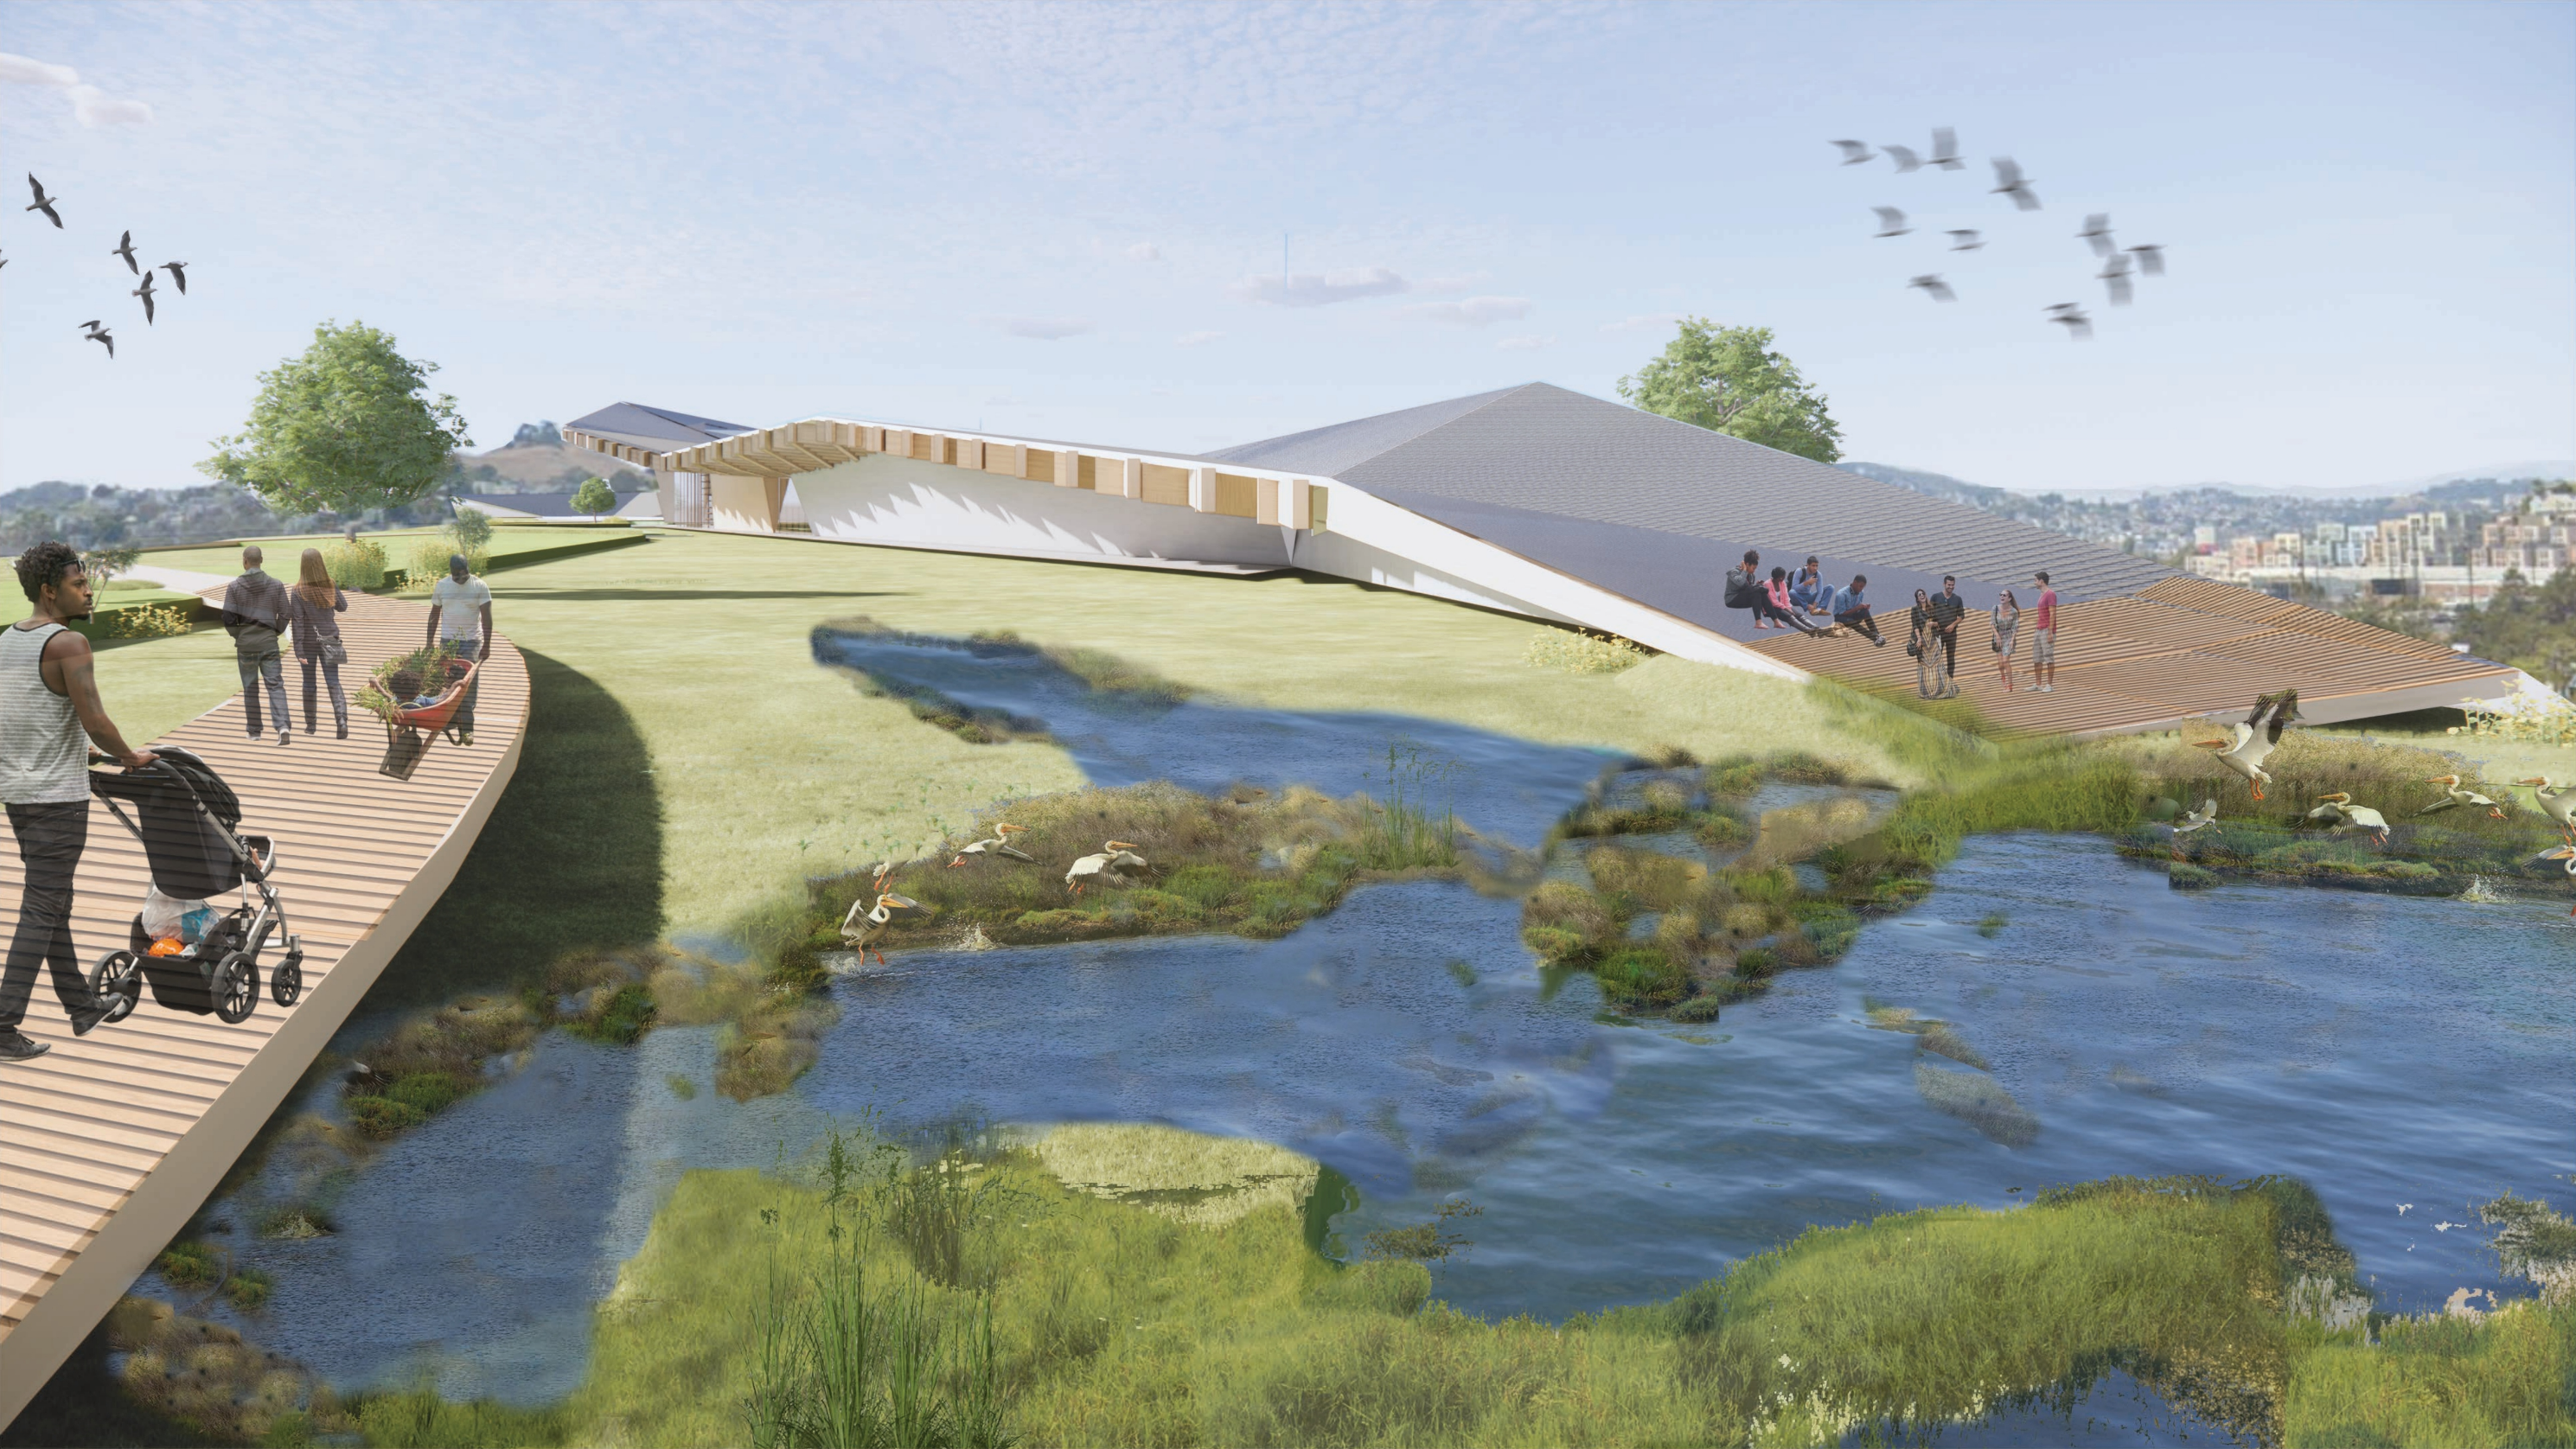 Exterior Rendering of Constructed Wetlands at Tail-end of Project 